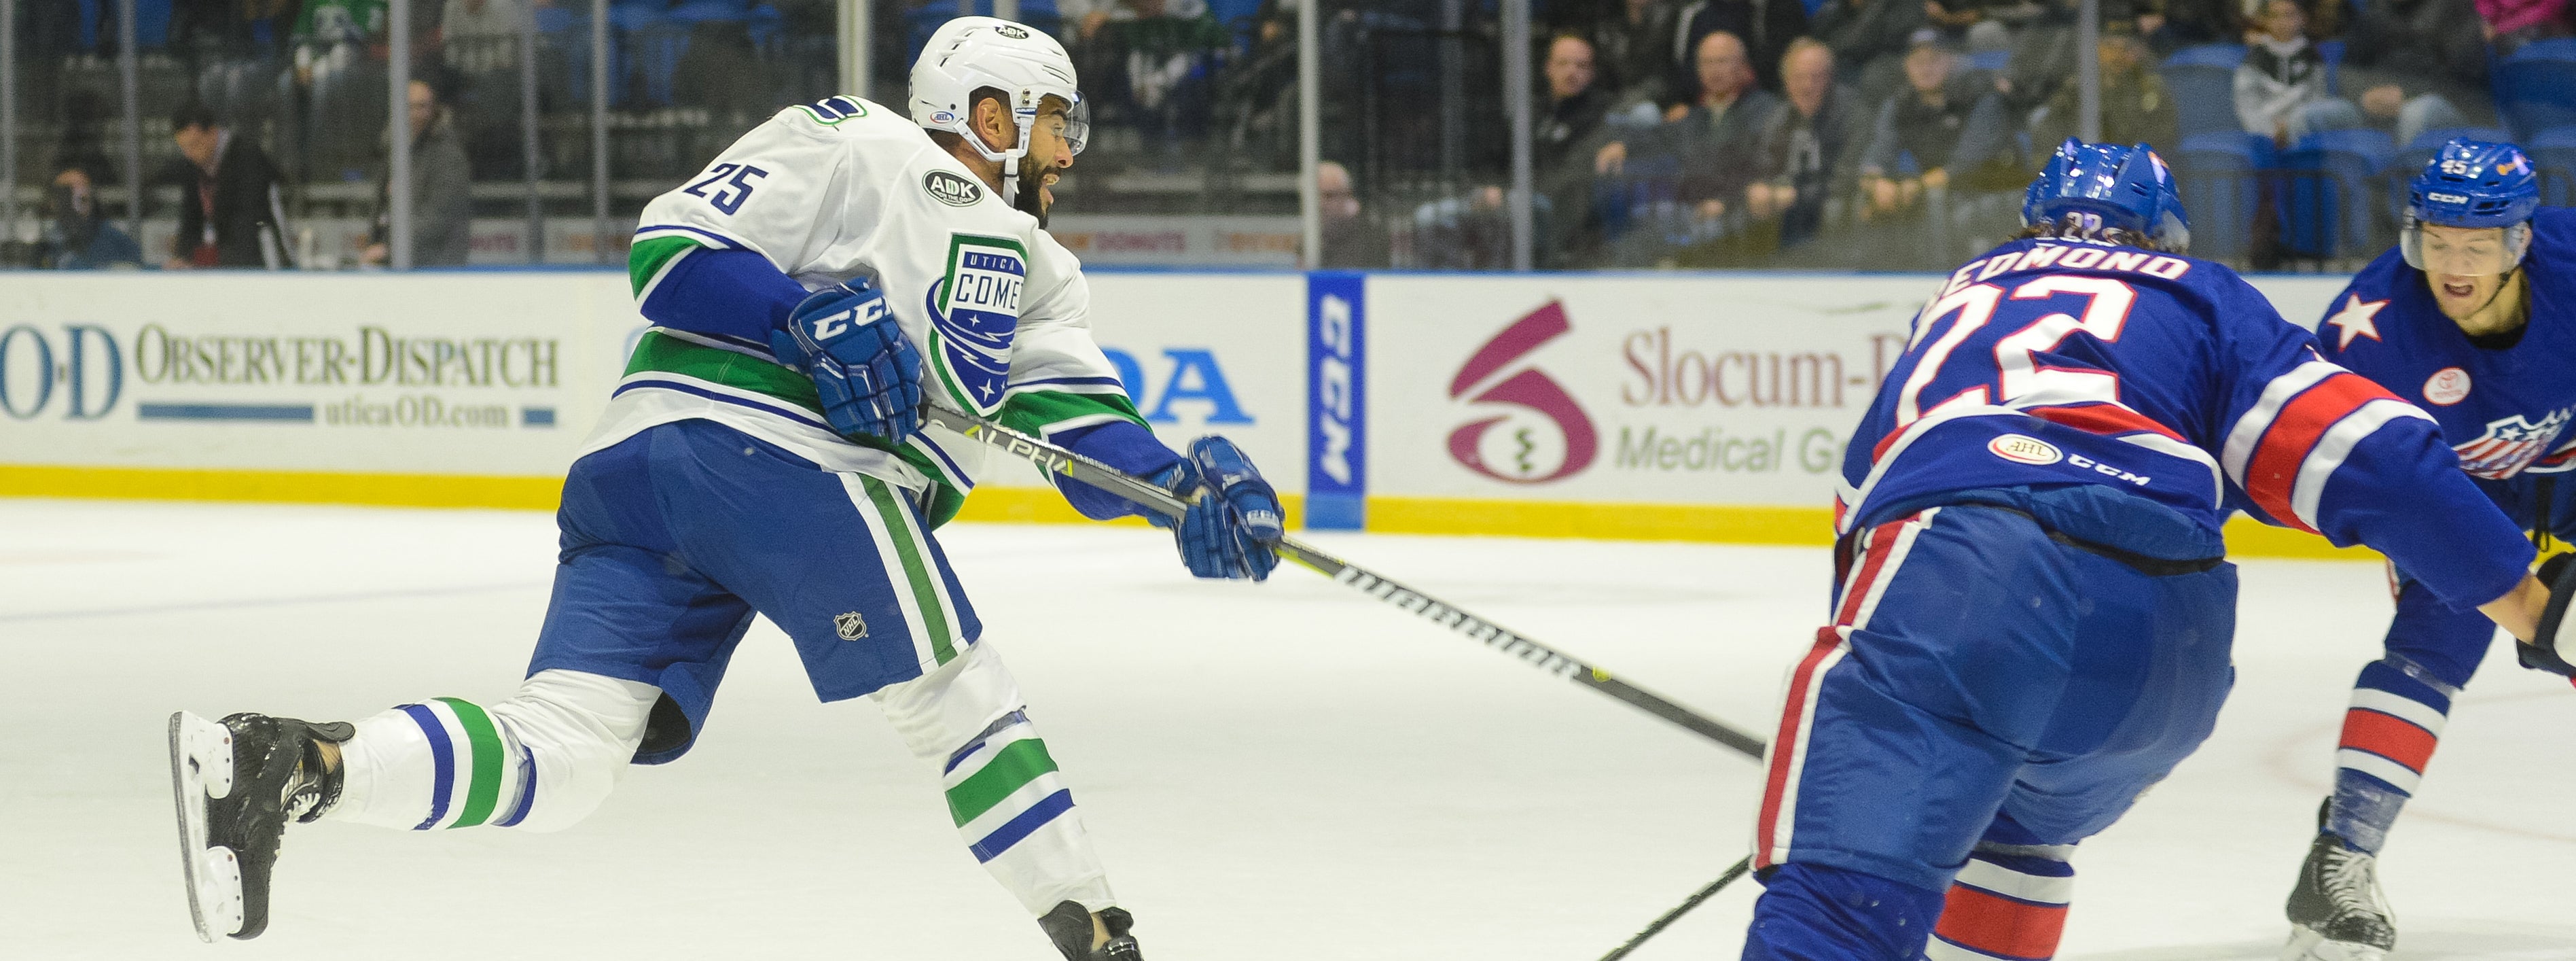 COMETS WRAP UP FOUR-GAME ROAD TRIP AGAINST ROCHESTER